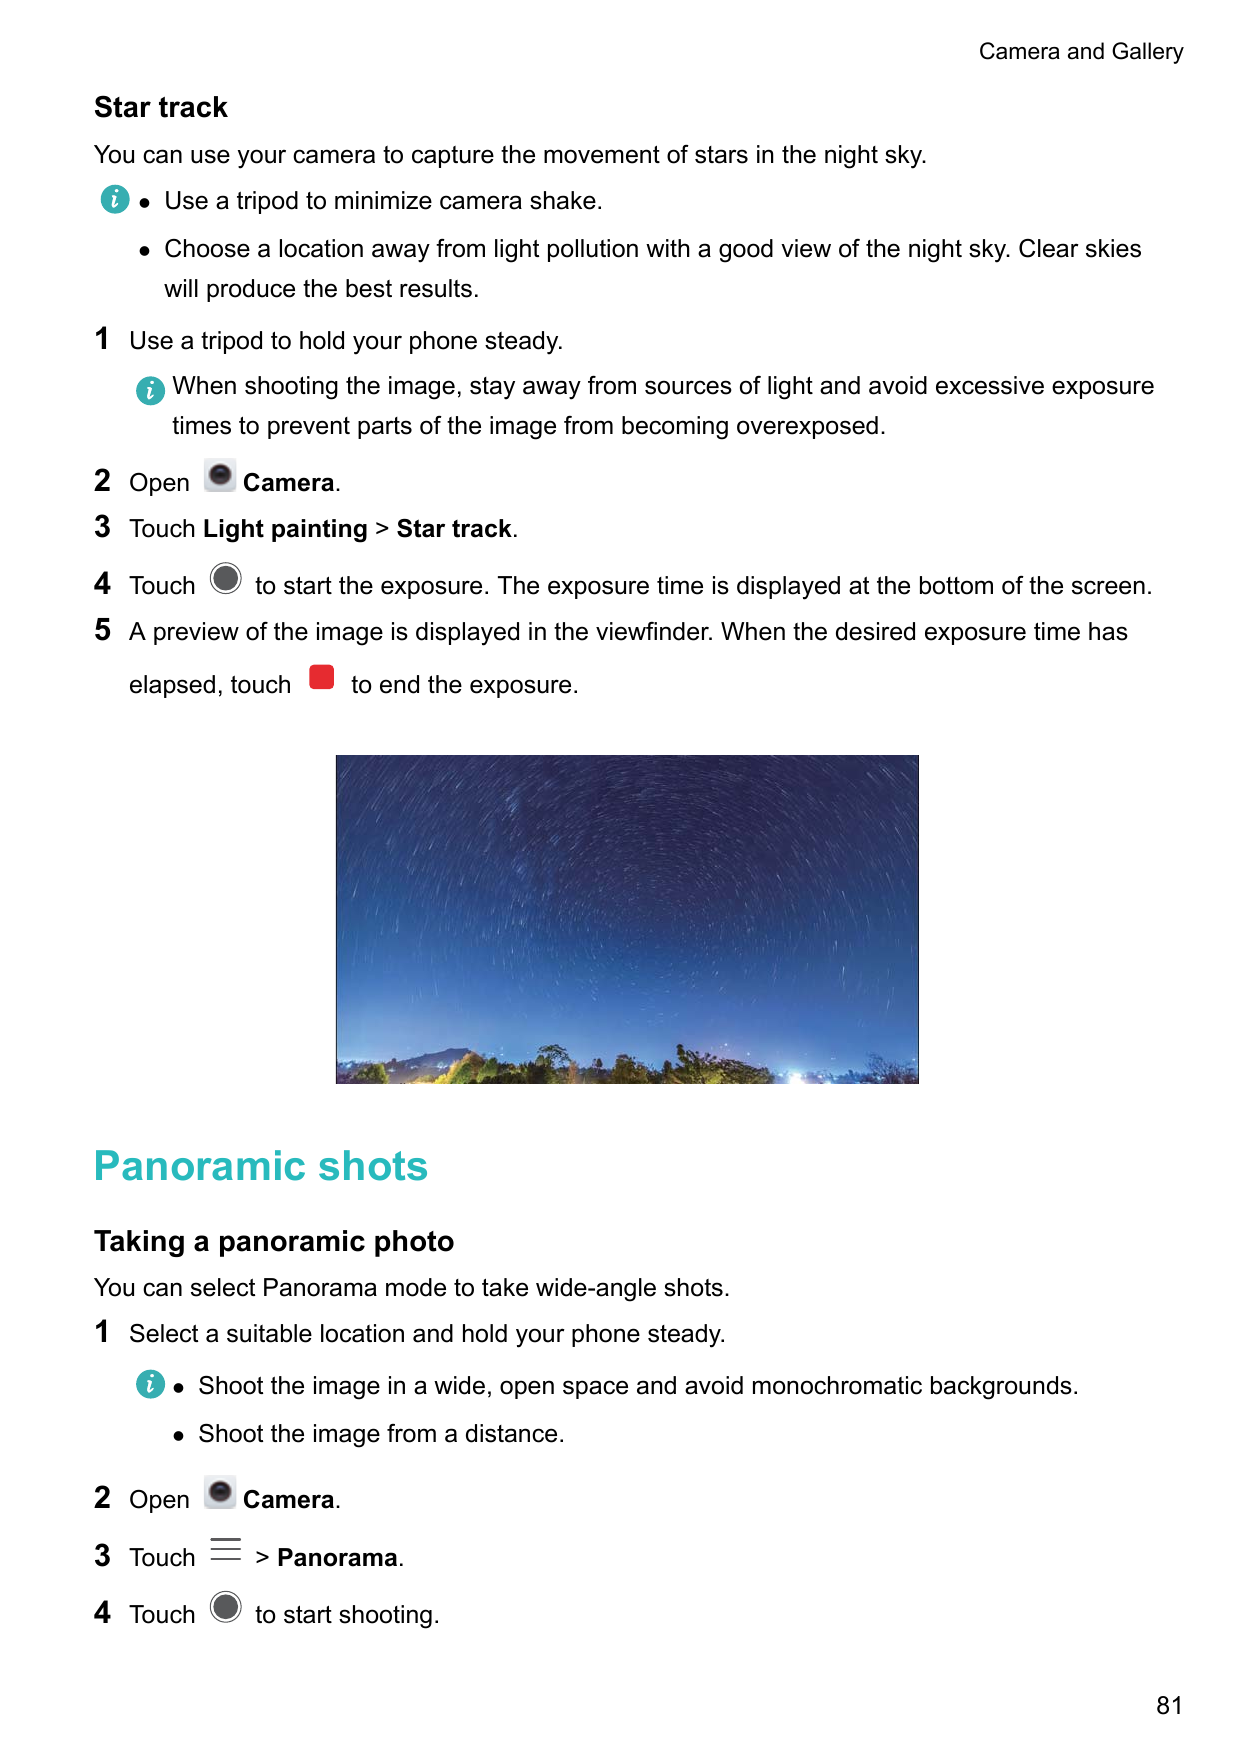 Camera and GalleryStar trackYou can use your camera to capture the movement of stars in the night sky.lUse a tripod to minimize 